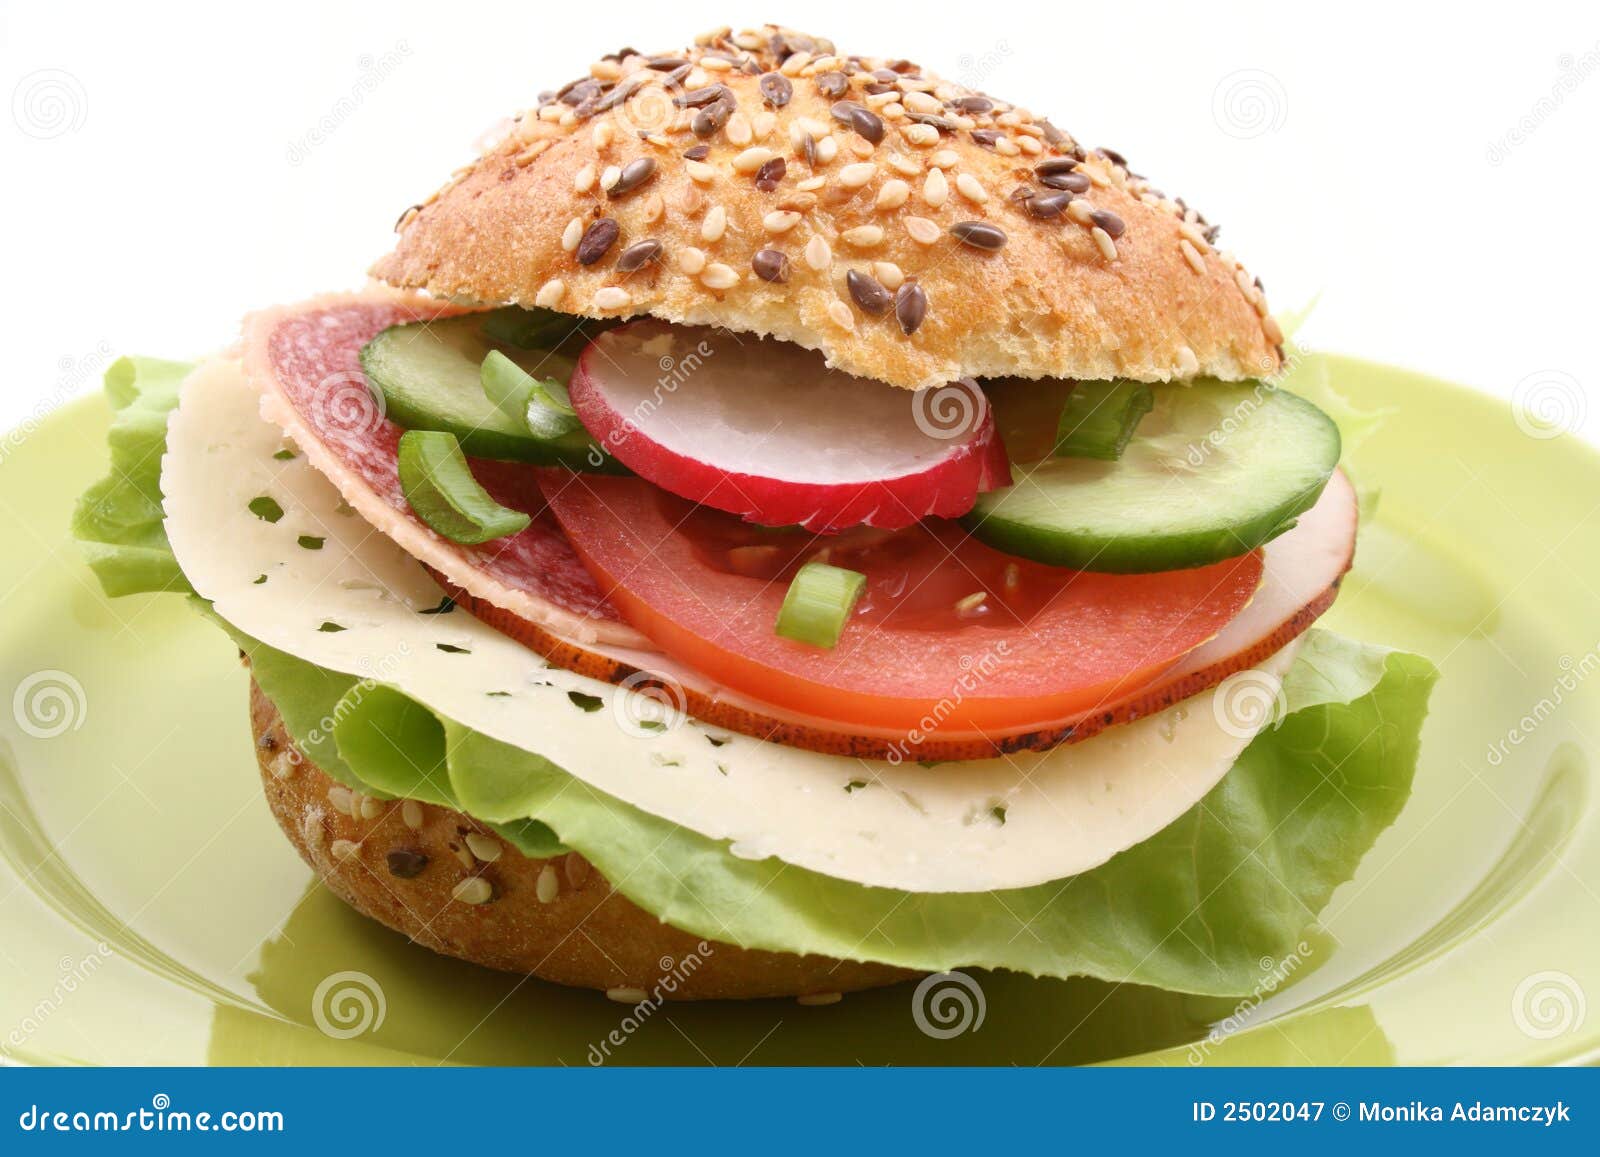 Delicious sandwich with cheese salami and vegetables isolated on white